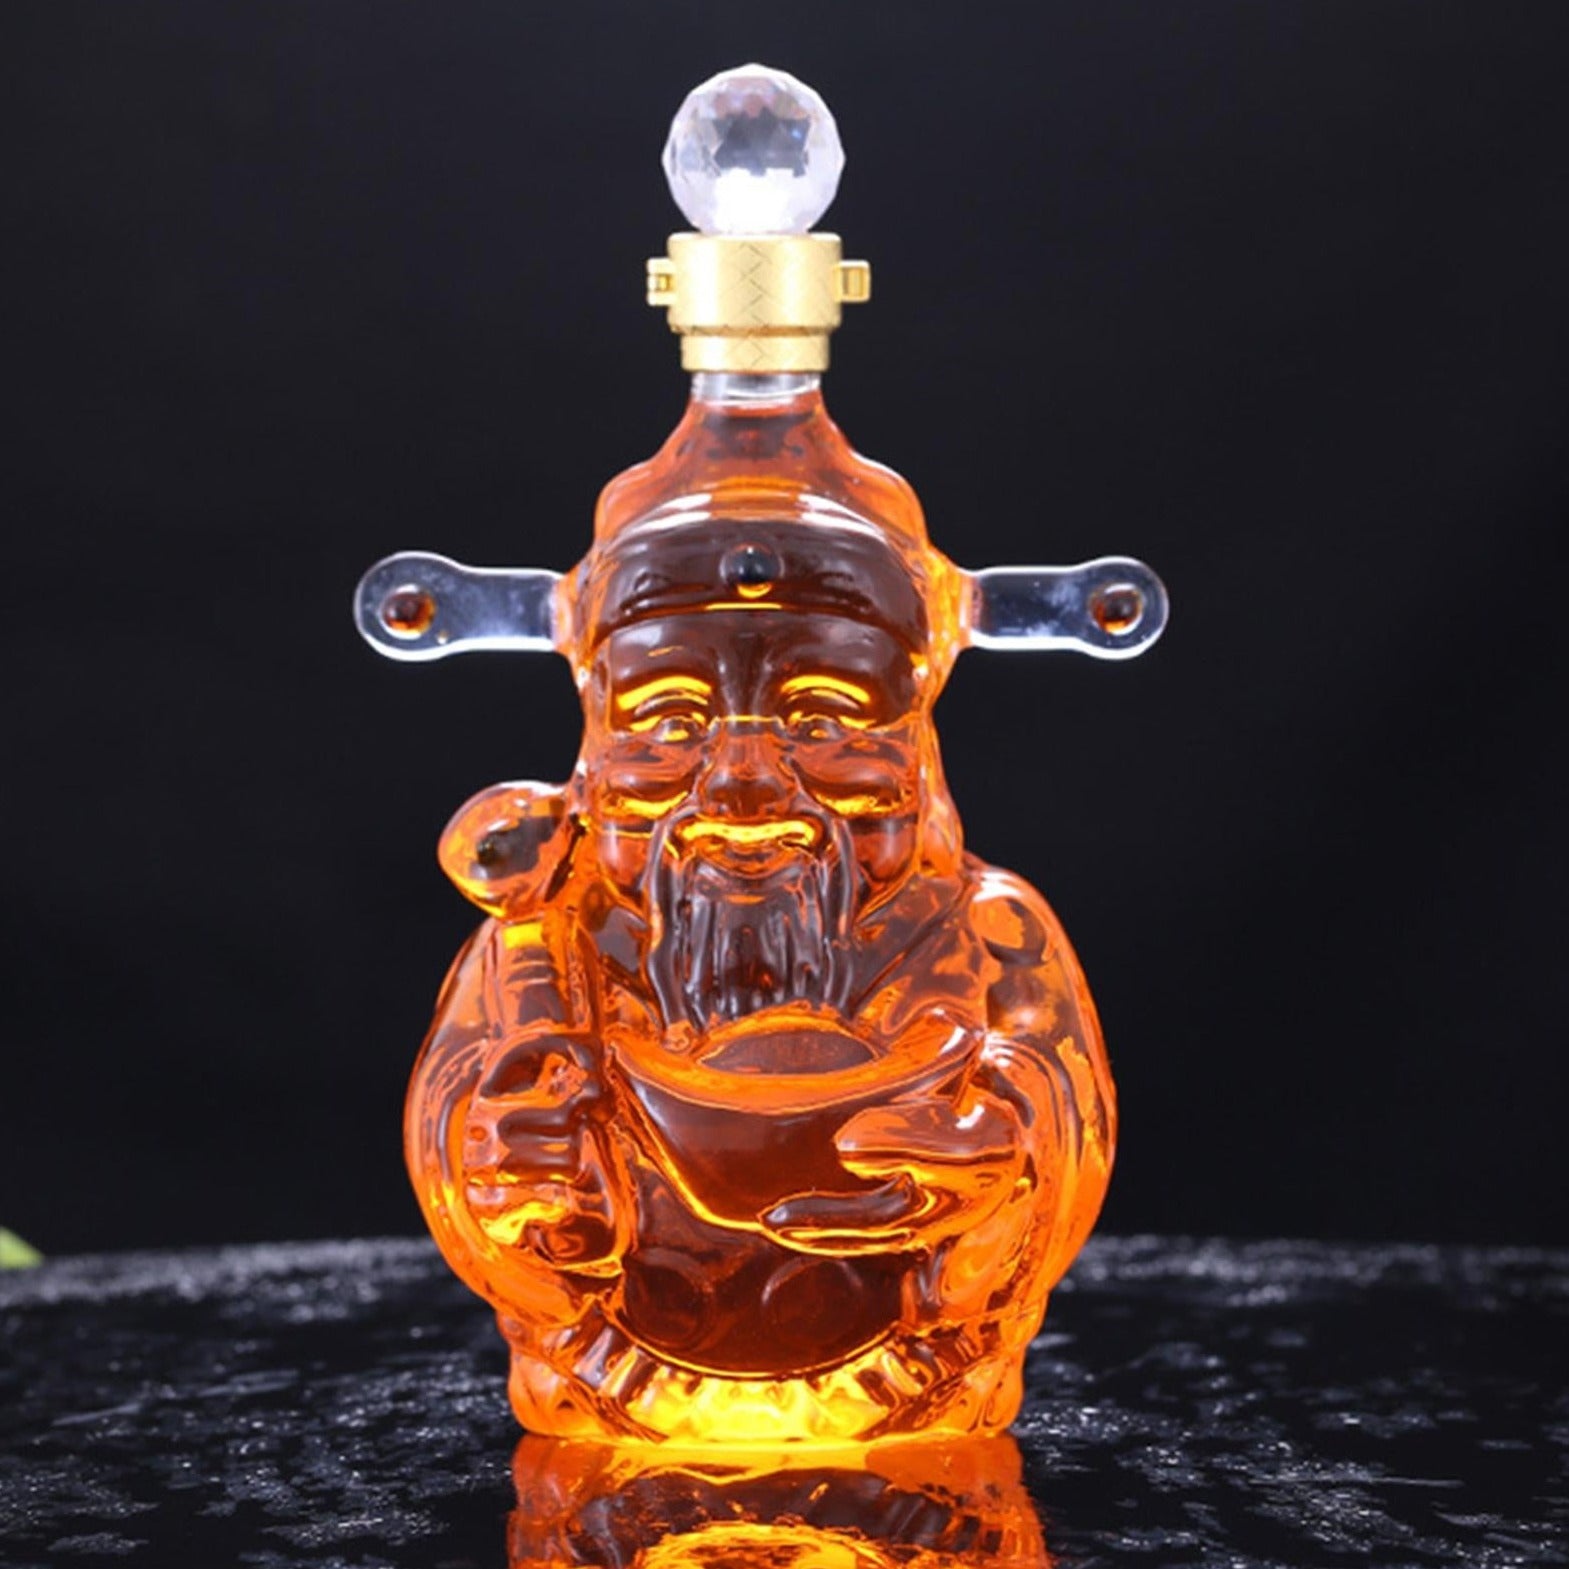 Glasscias's Chinese God of Fortune decanter